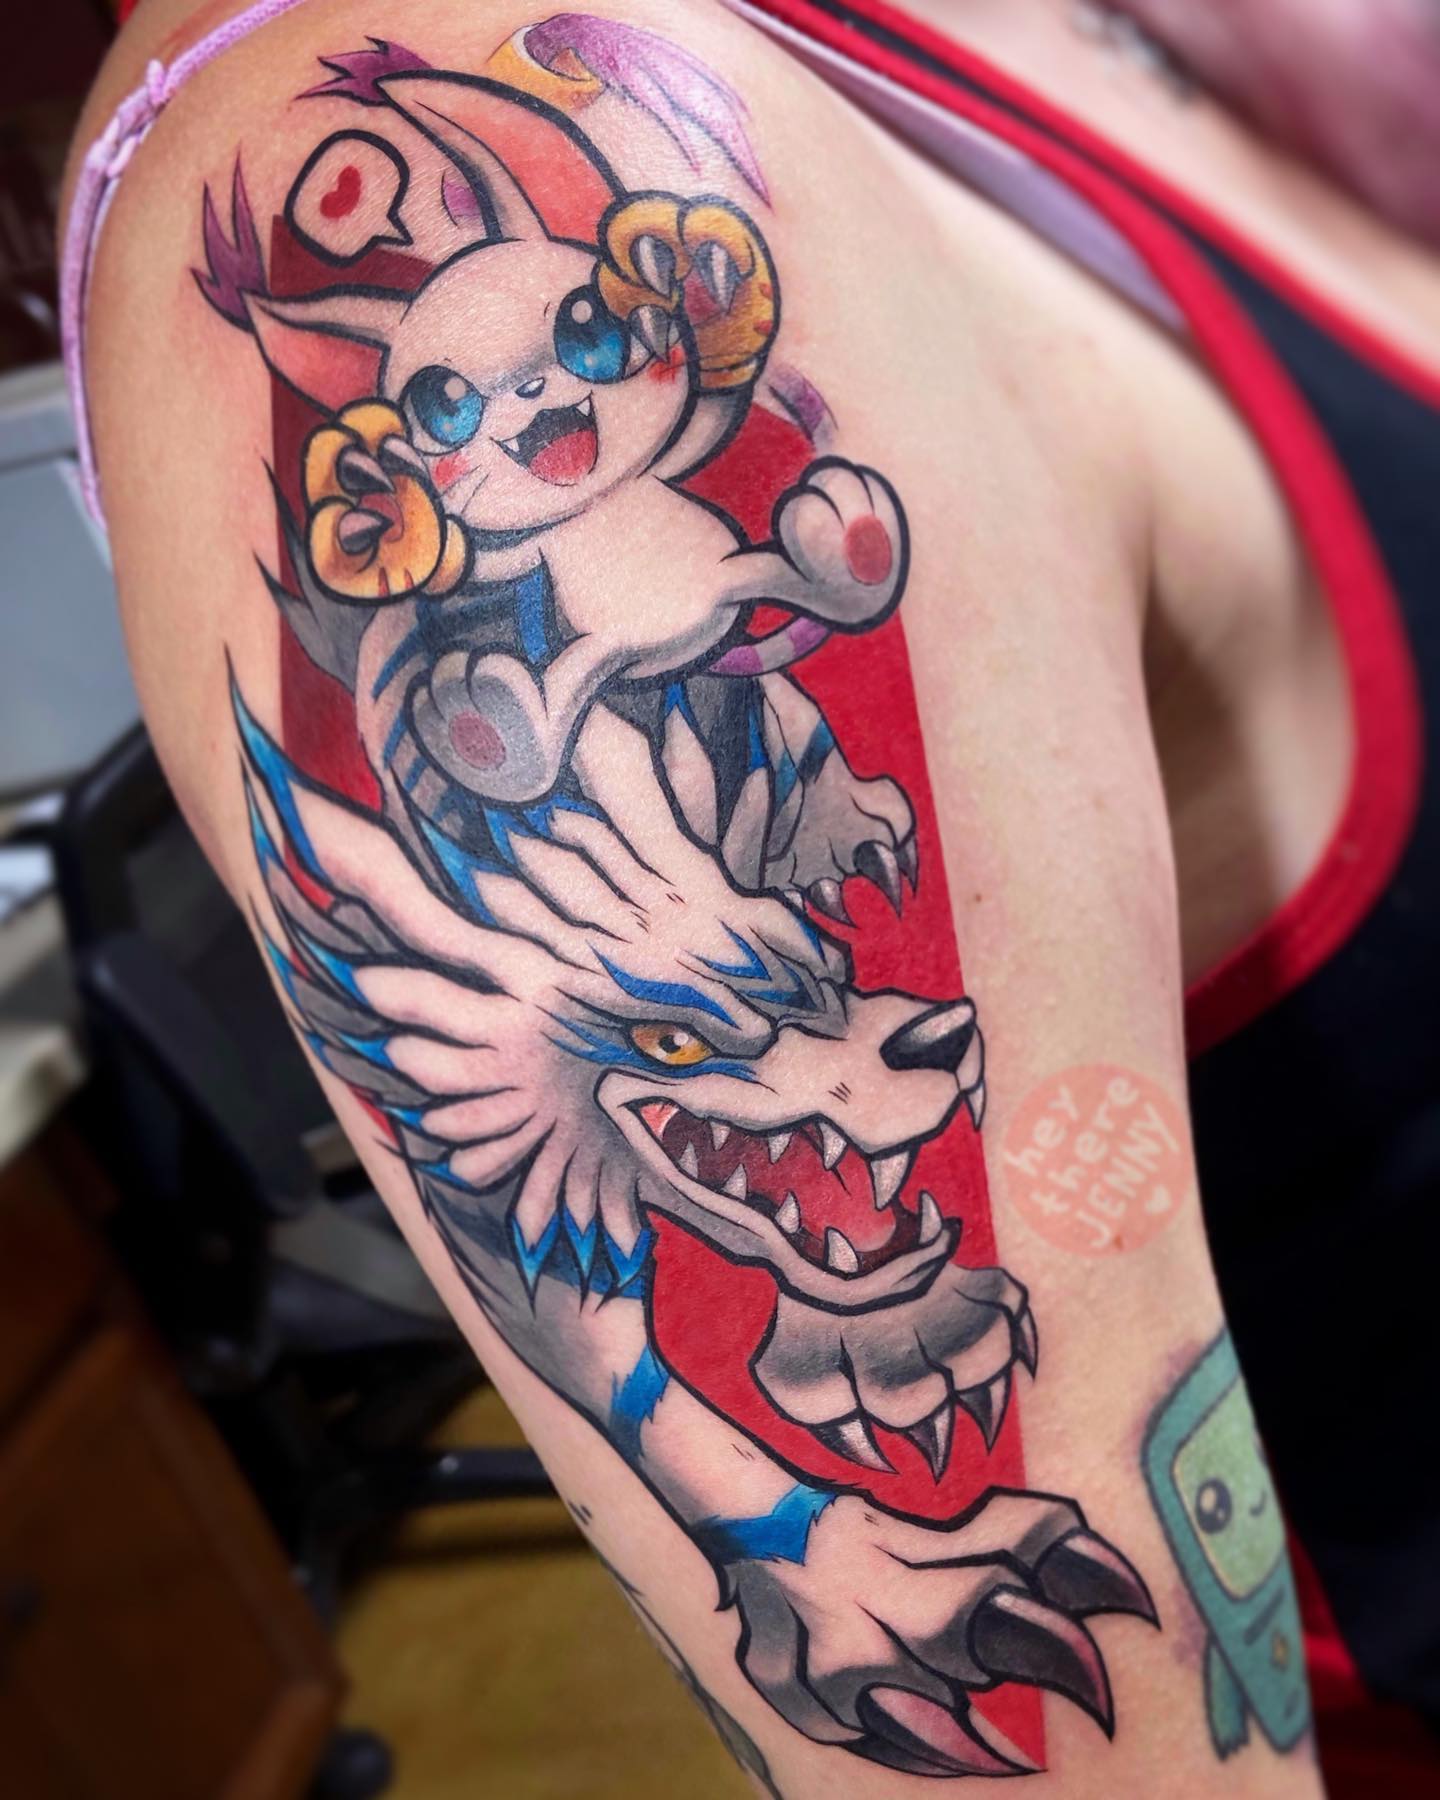 Garurumon and Gatomon are Digimon, which are basically digital monsters. They're also a part of the series that includes Pokemon. They're like the Pokemon equivalent of cats, but they're more like wolves than house cats. Go and get a tattoo of them.